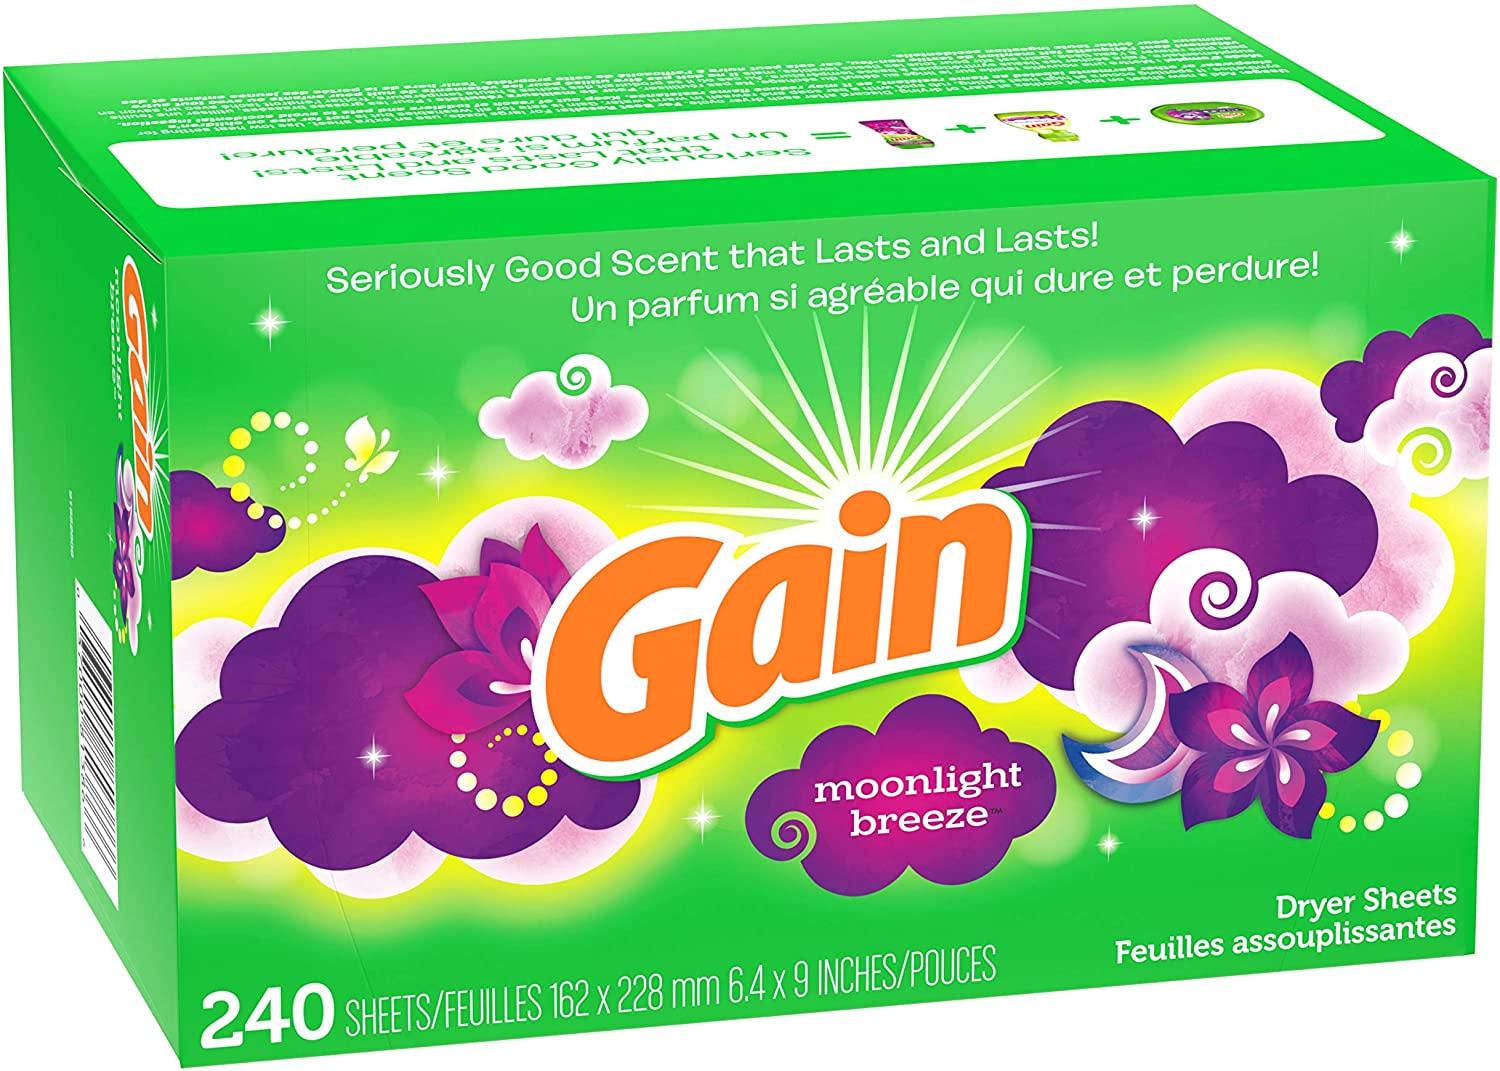 240 Gain Moonlight Breeze Dryer Sheets for $6.85 Shipped